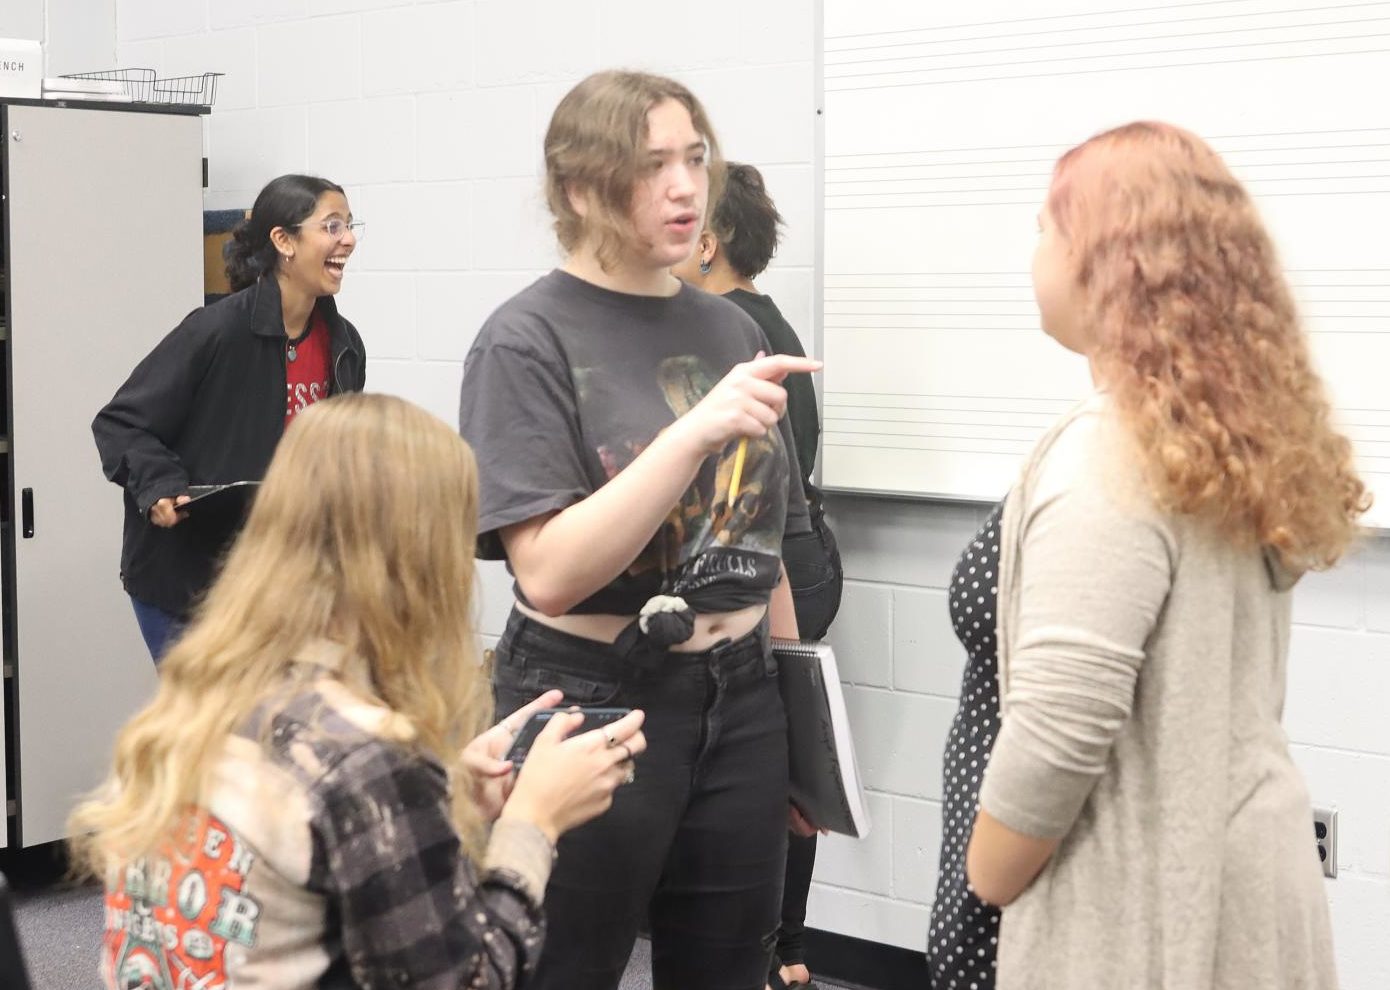 Senior Angela Espenscheid gives her friend some tips before her audition. Chorus teacher Christopher Hickey chose performers based on student ability and song relevance. 